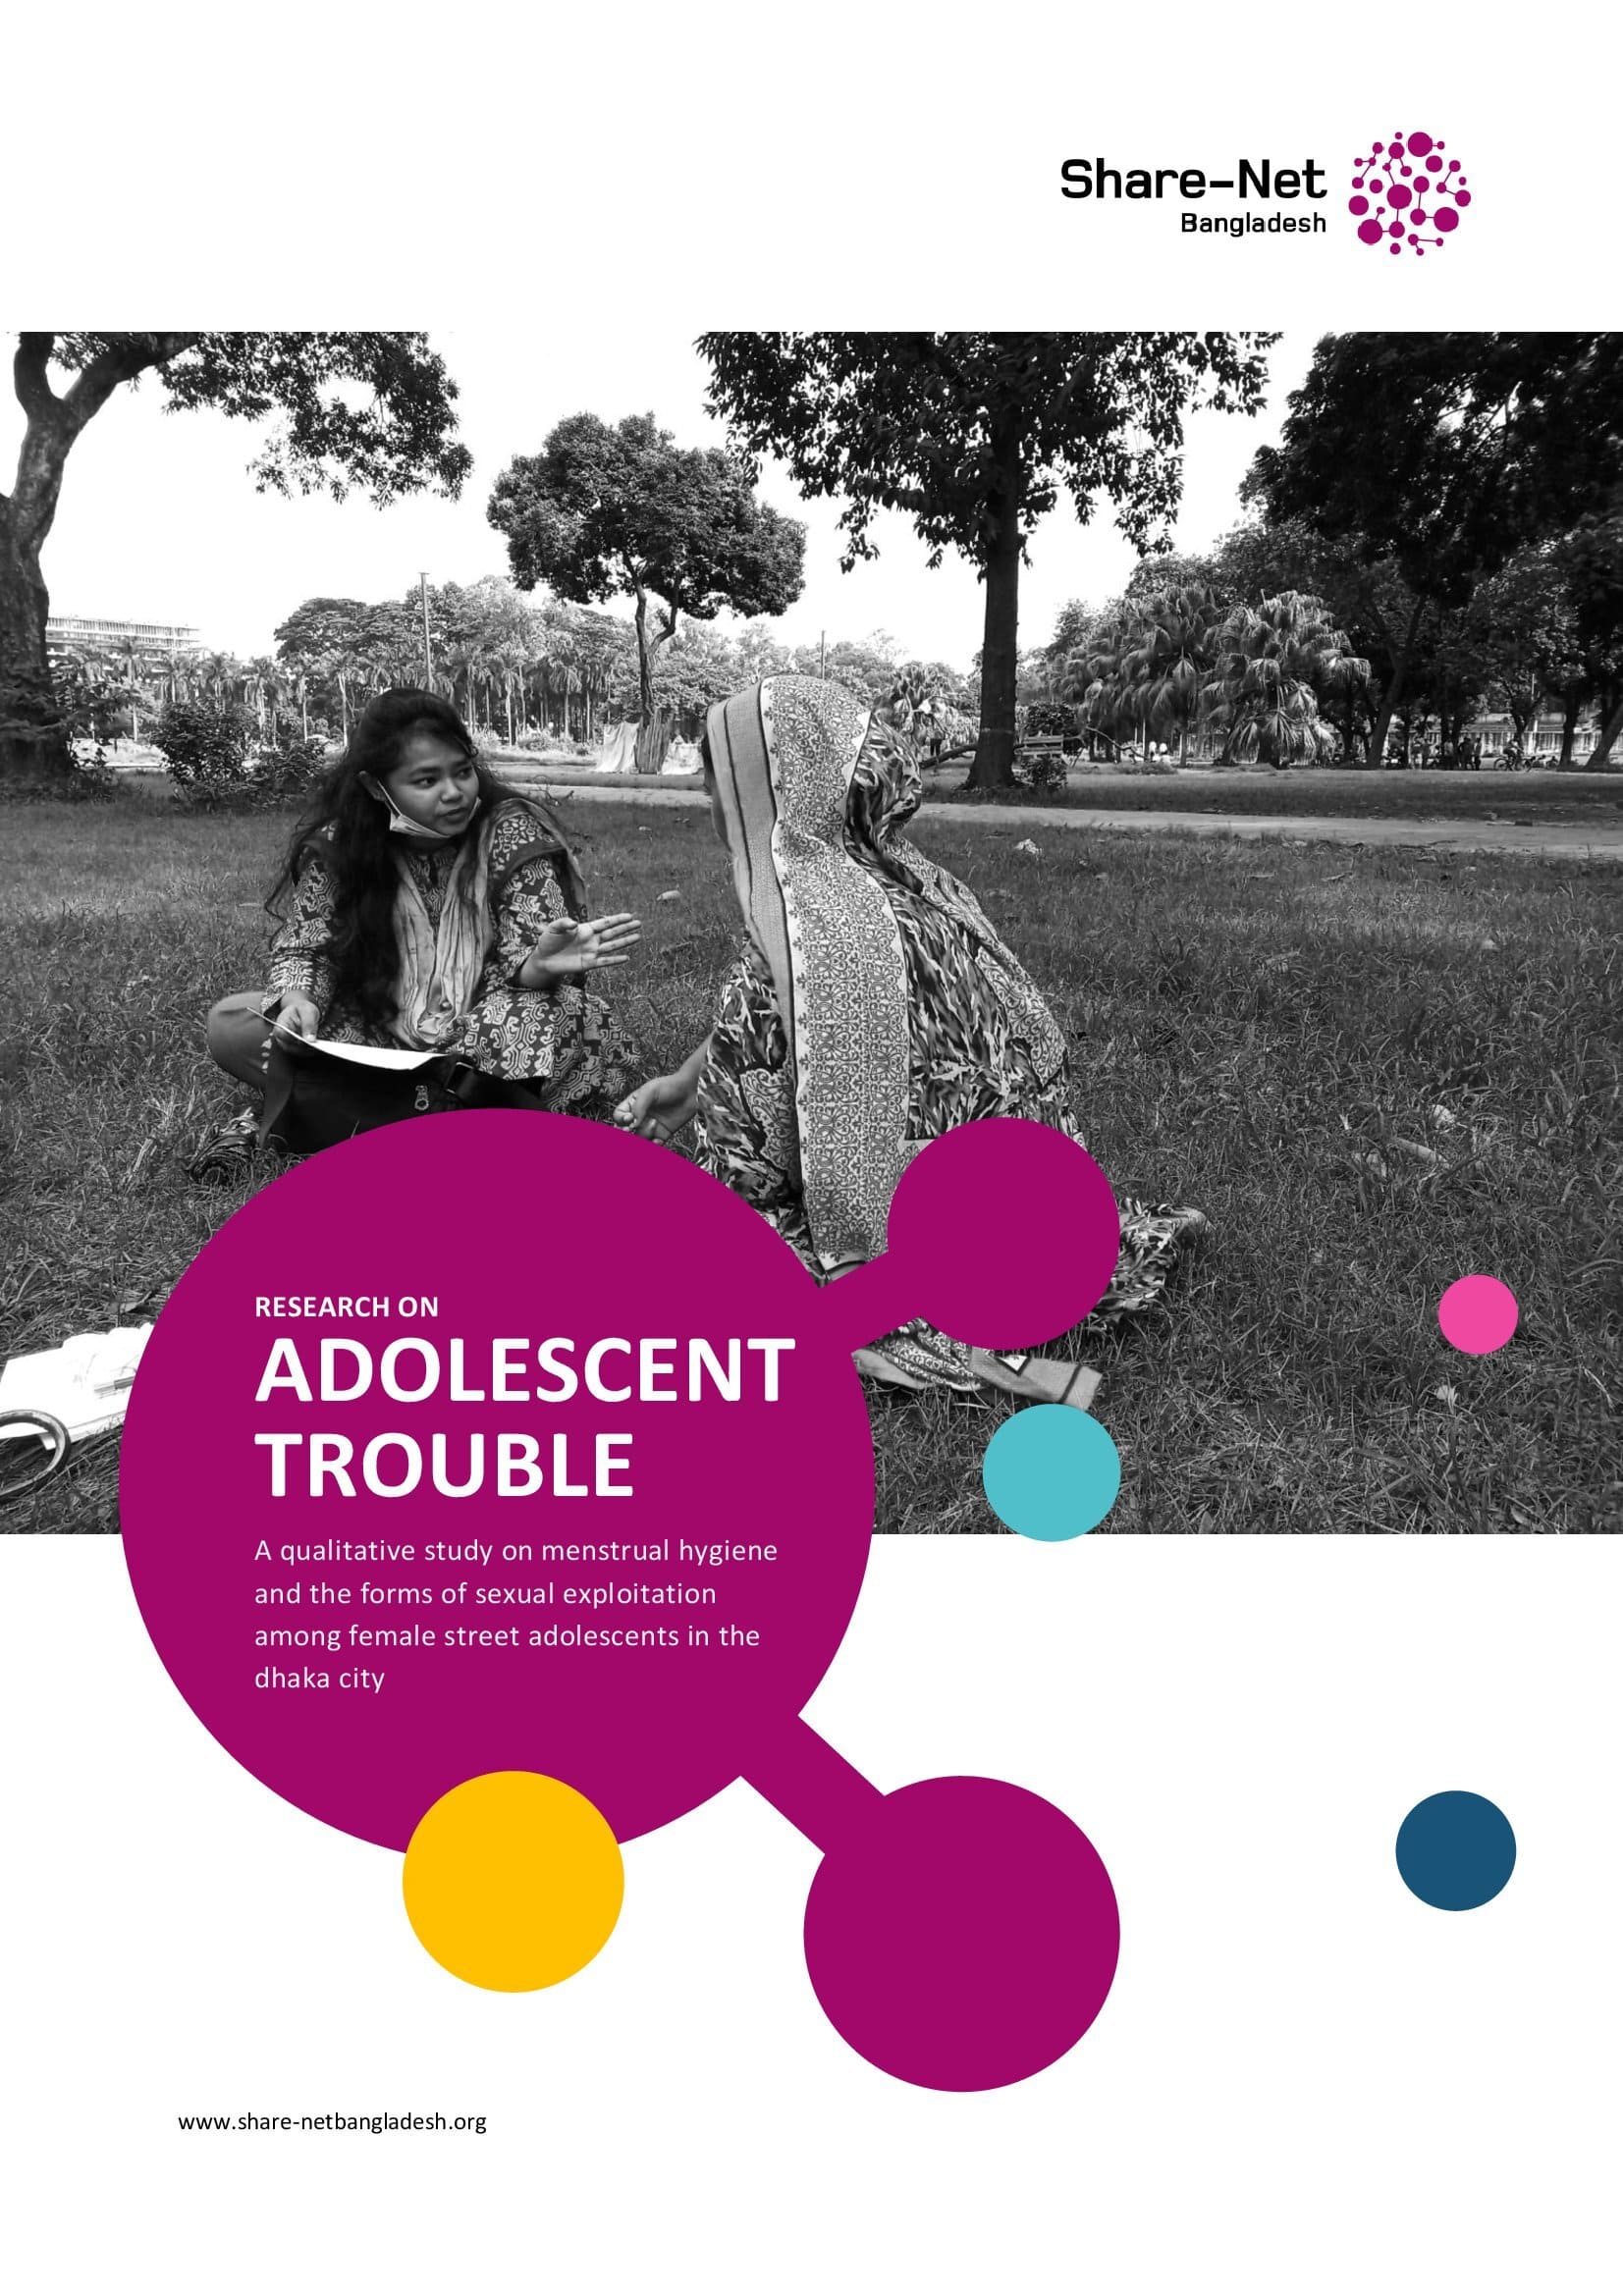 Adolescent Trouble: A qualitative study on menstrual hygiene and the forms of sexual exploitation among female street adolescents in the dhaka city